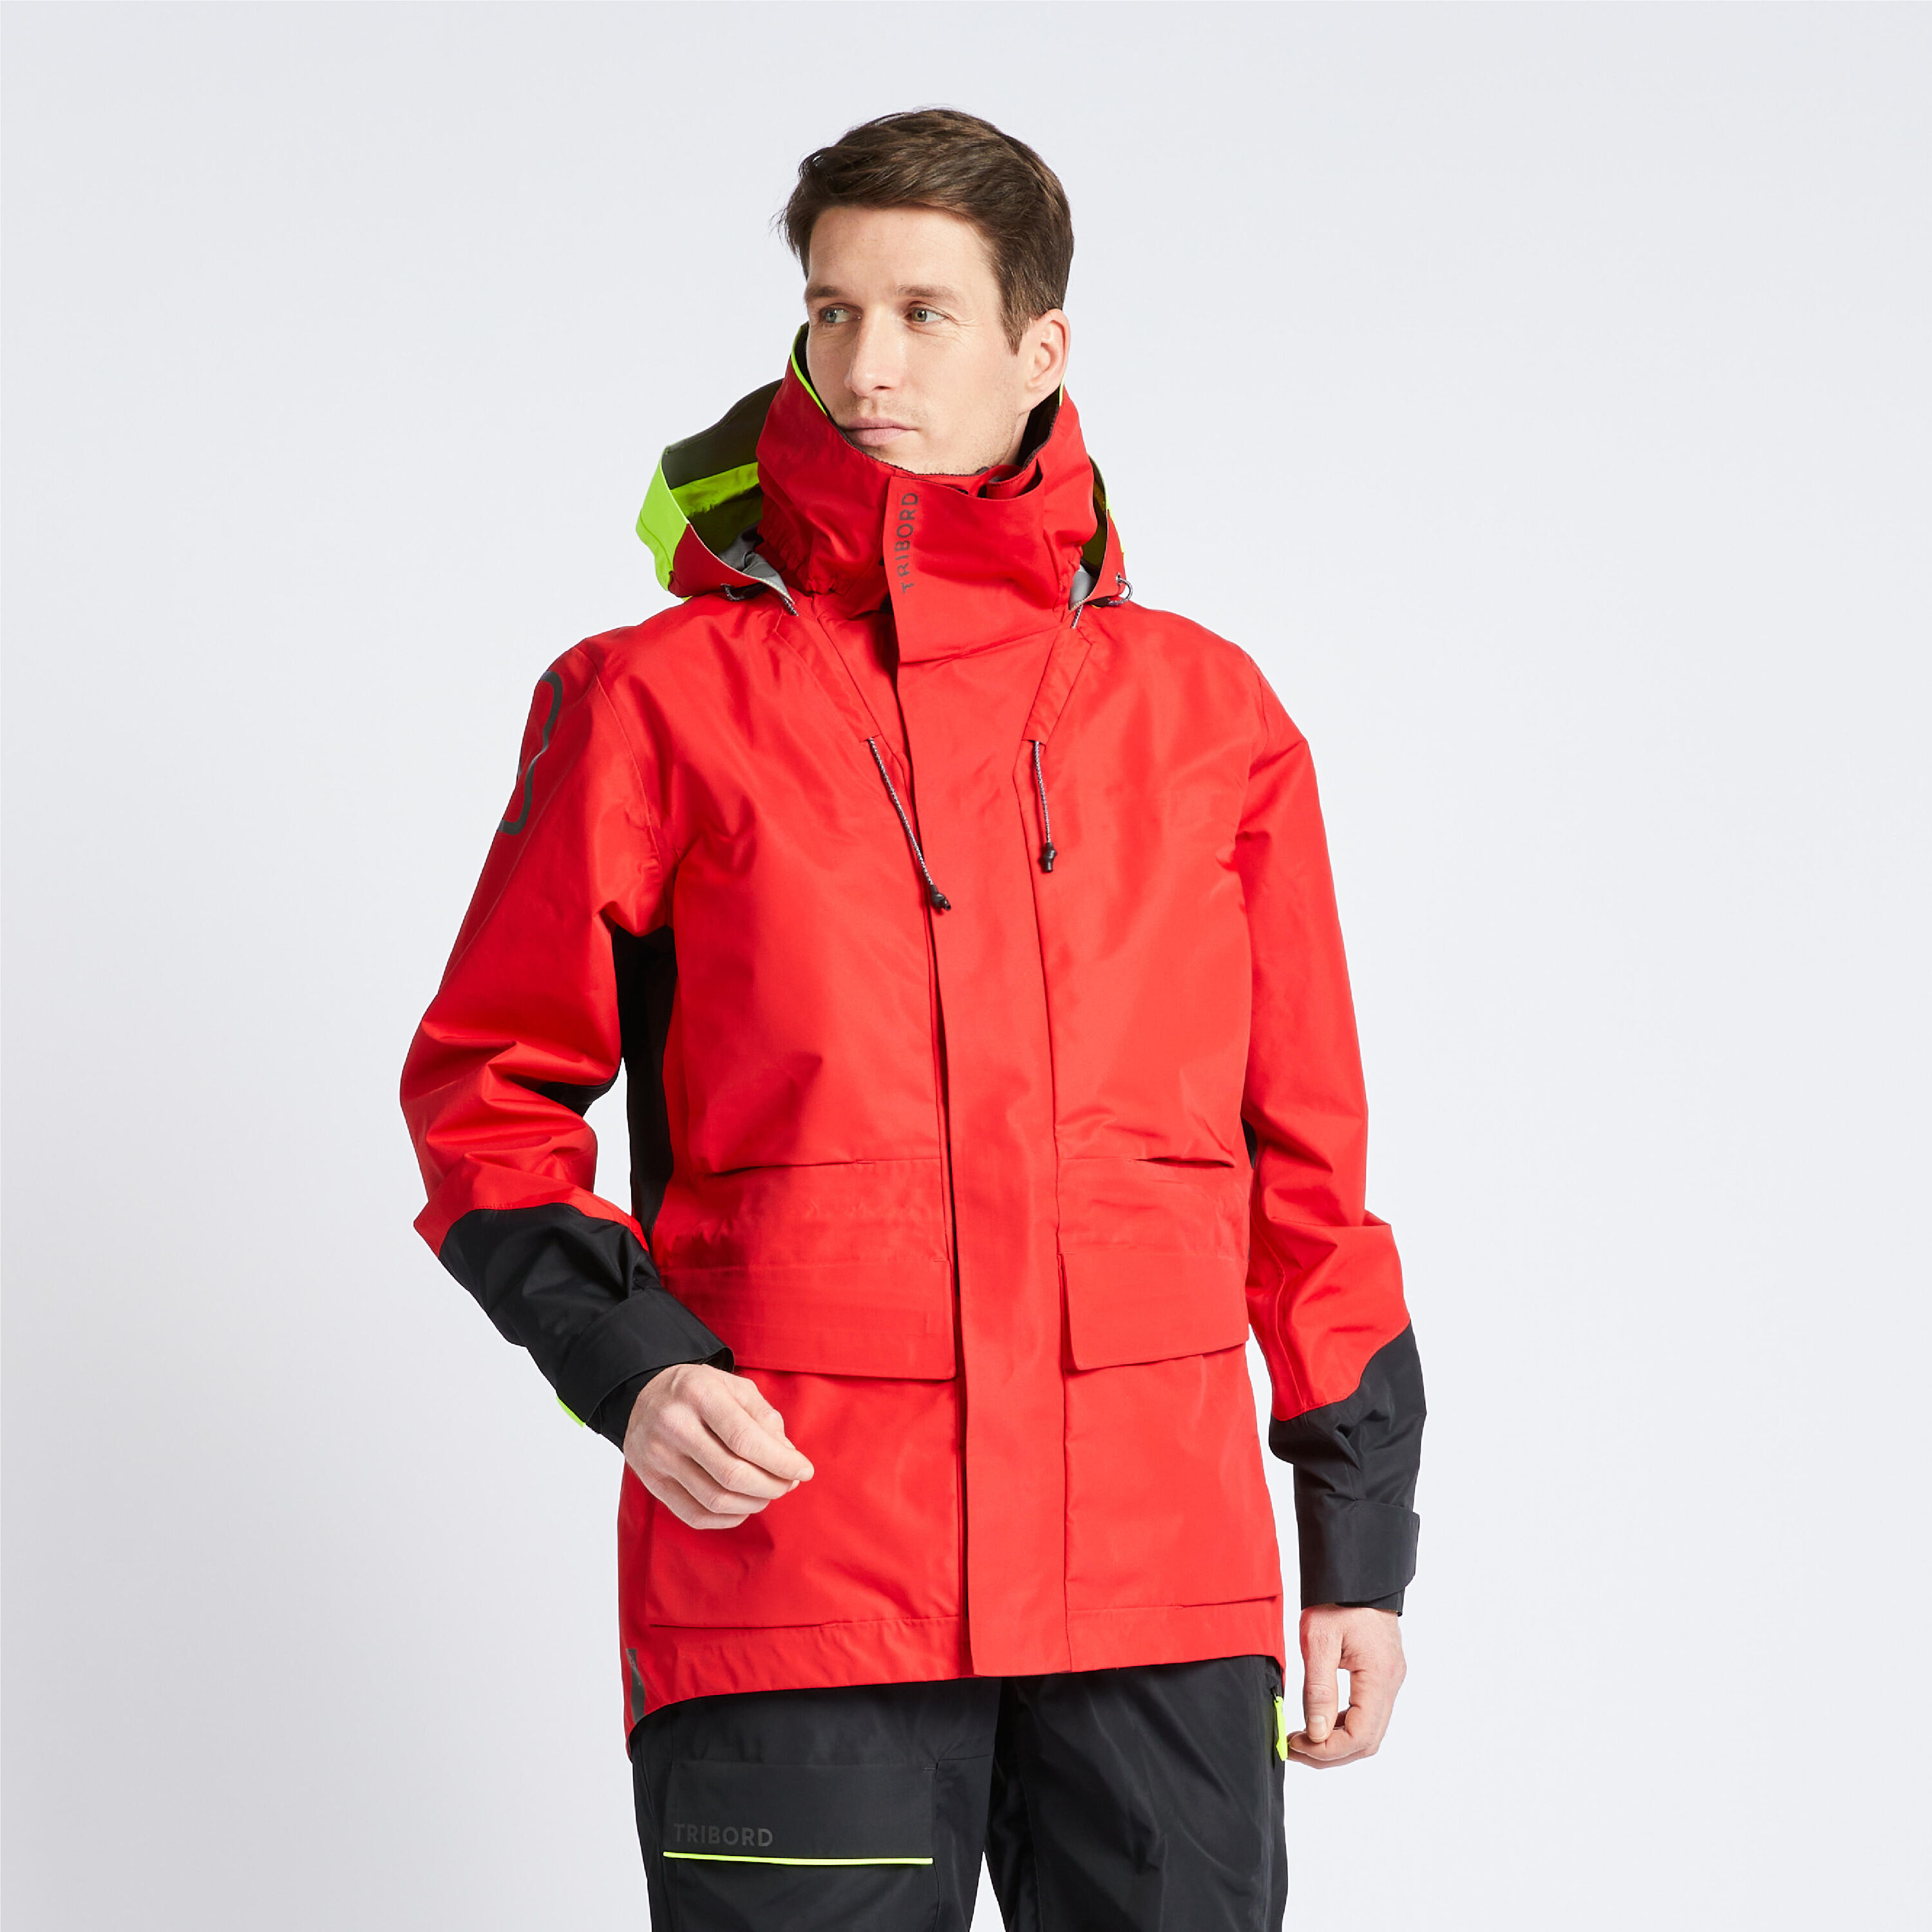 TRIBORD Men’s Sailing jacket Offshore 900 - Red